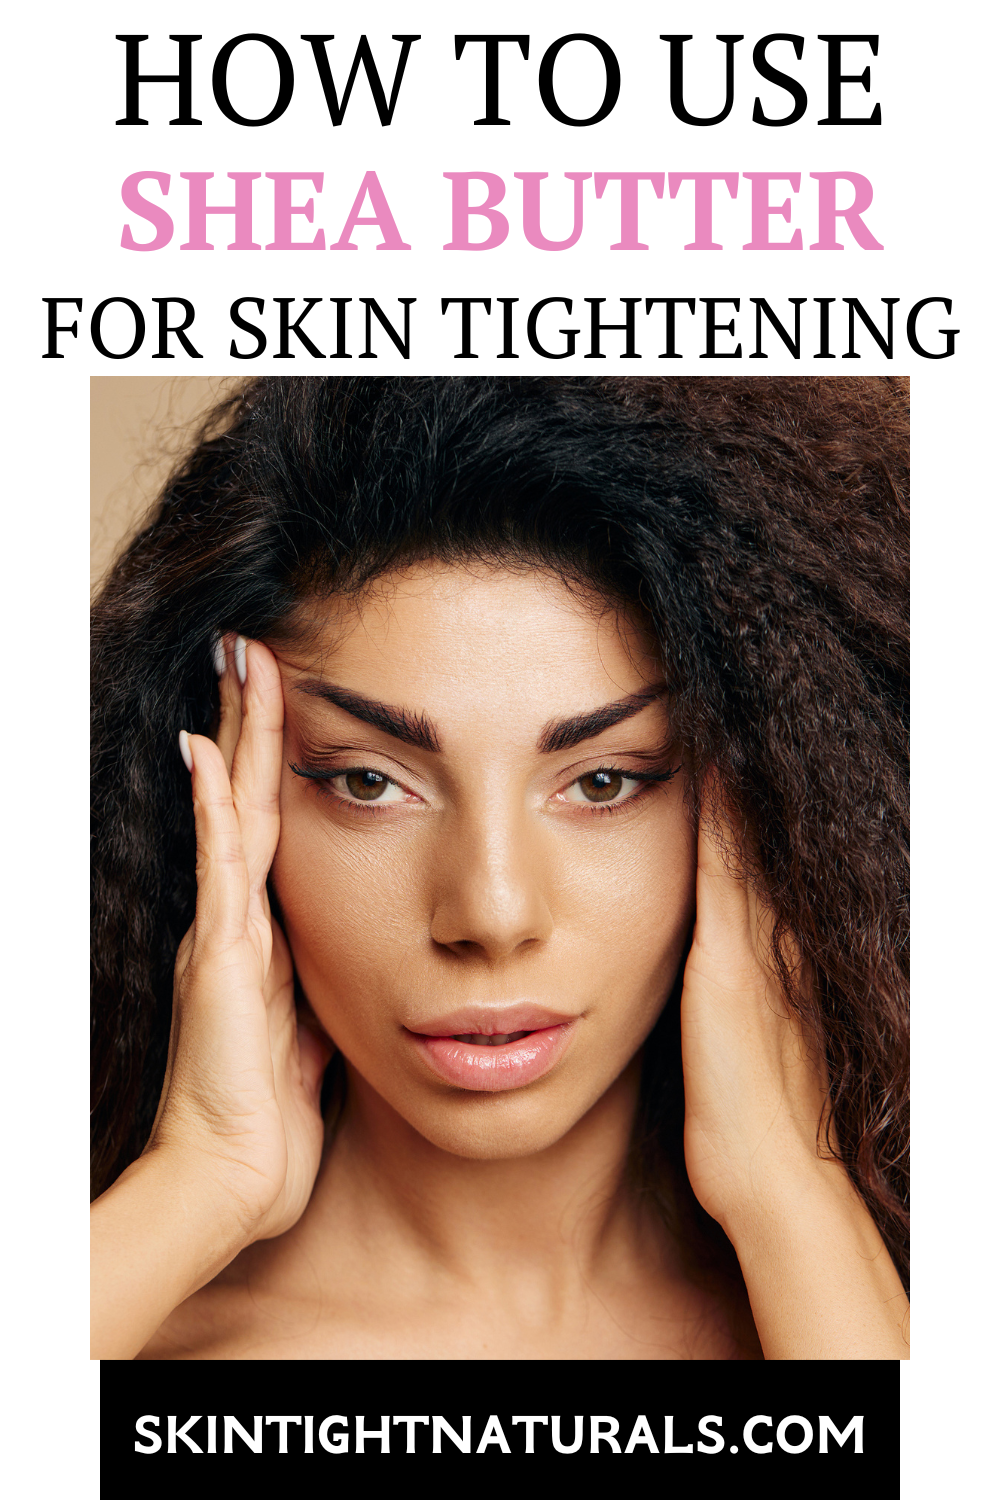 3 Benefits of Shea Butter For Skin Tightening